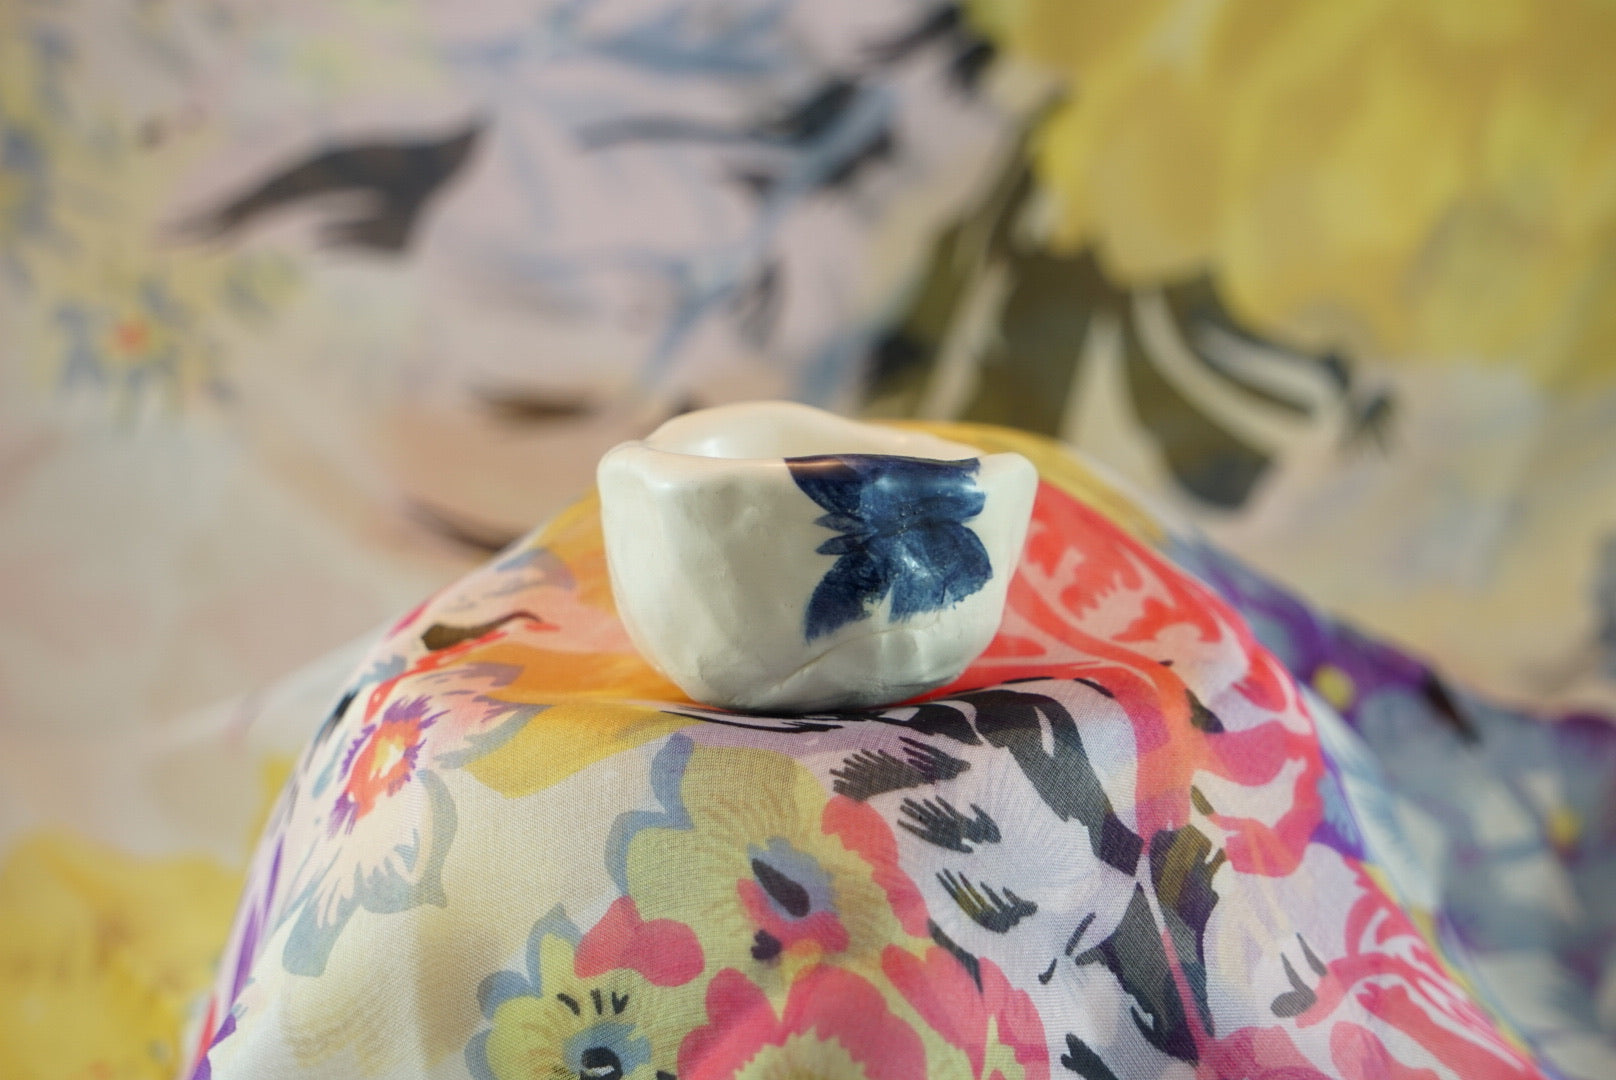 Small, handmade white ceramic pinch pot with loosely drawn blue insects. 